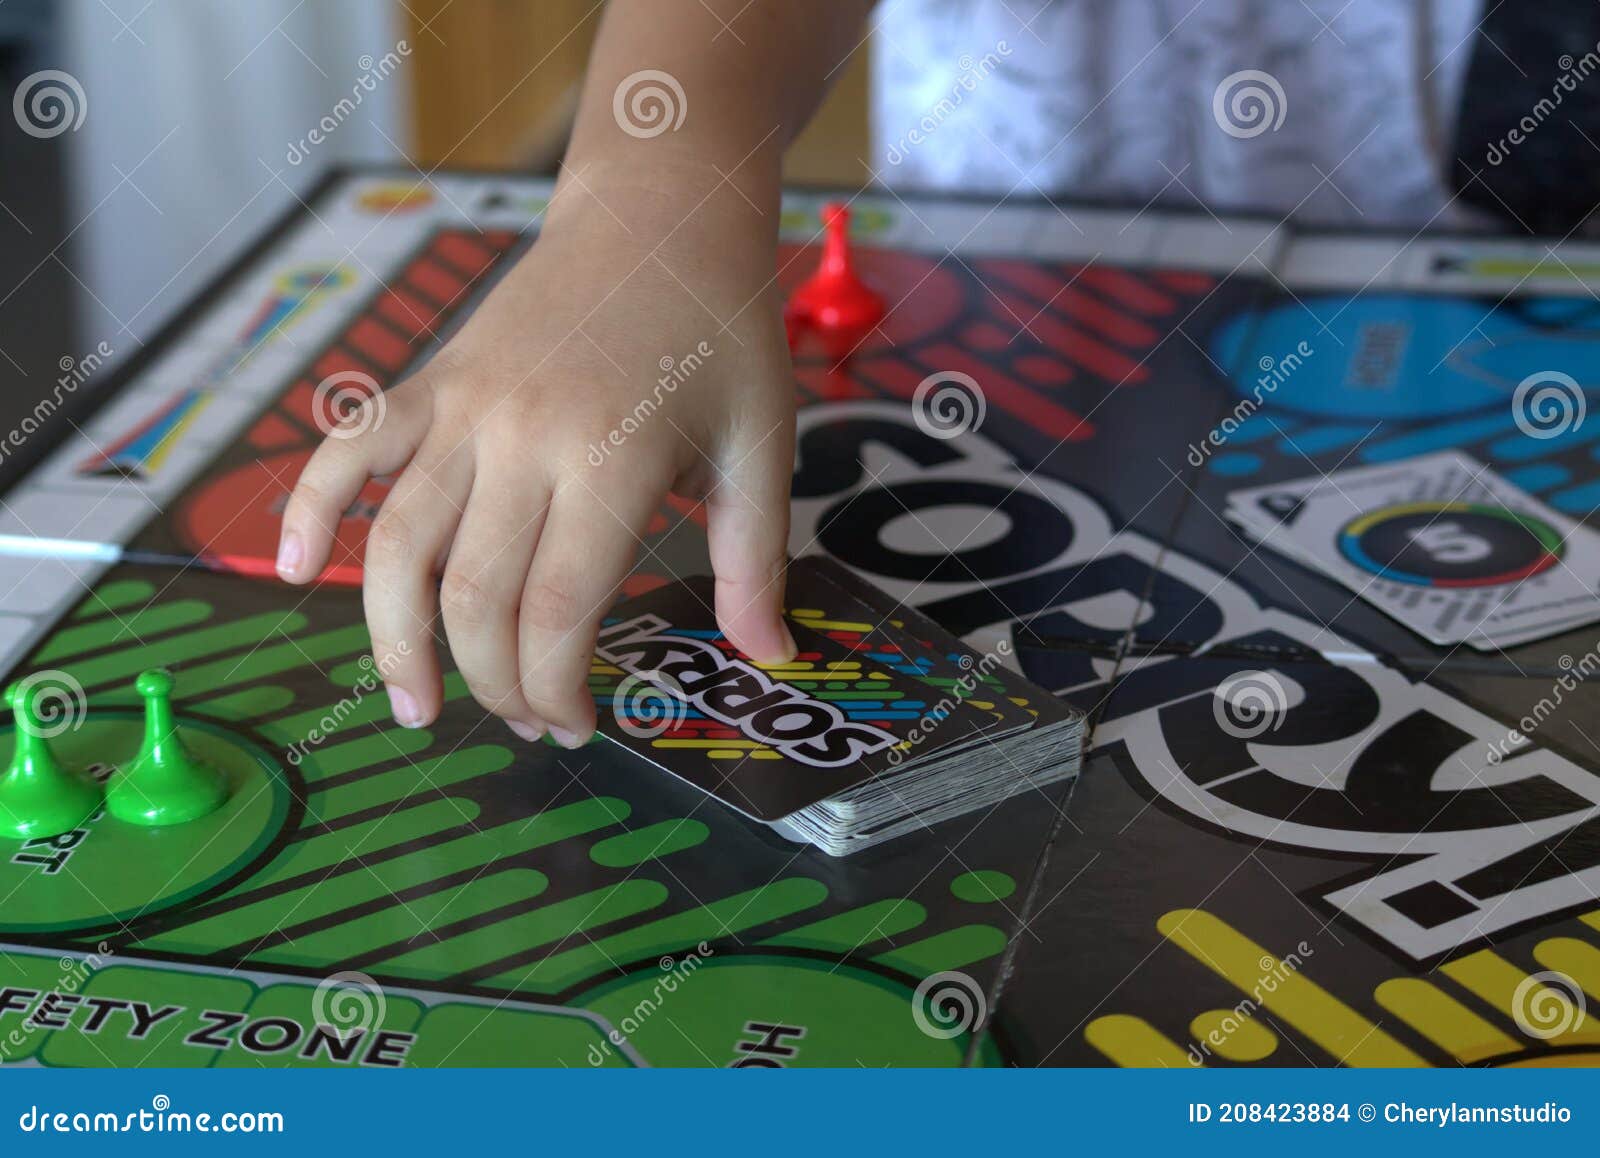 Board Game Sorry Photos Free Royalty Free Stock Photos From Dreamstime